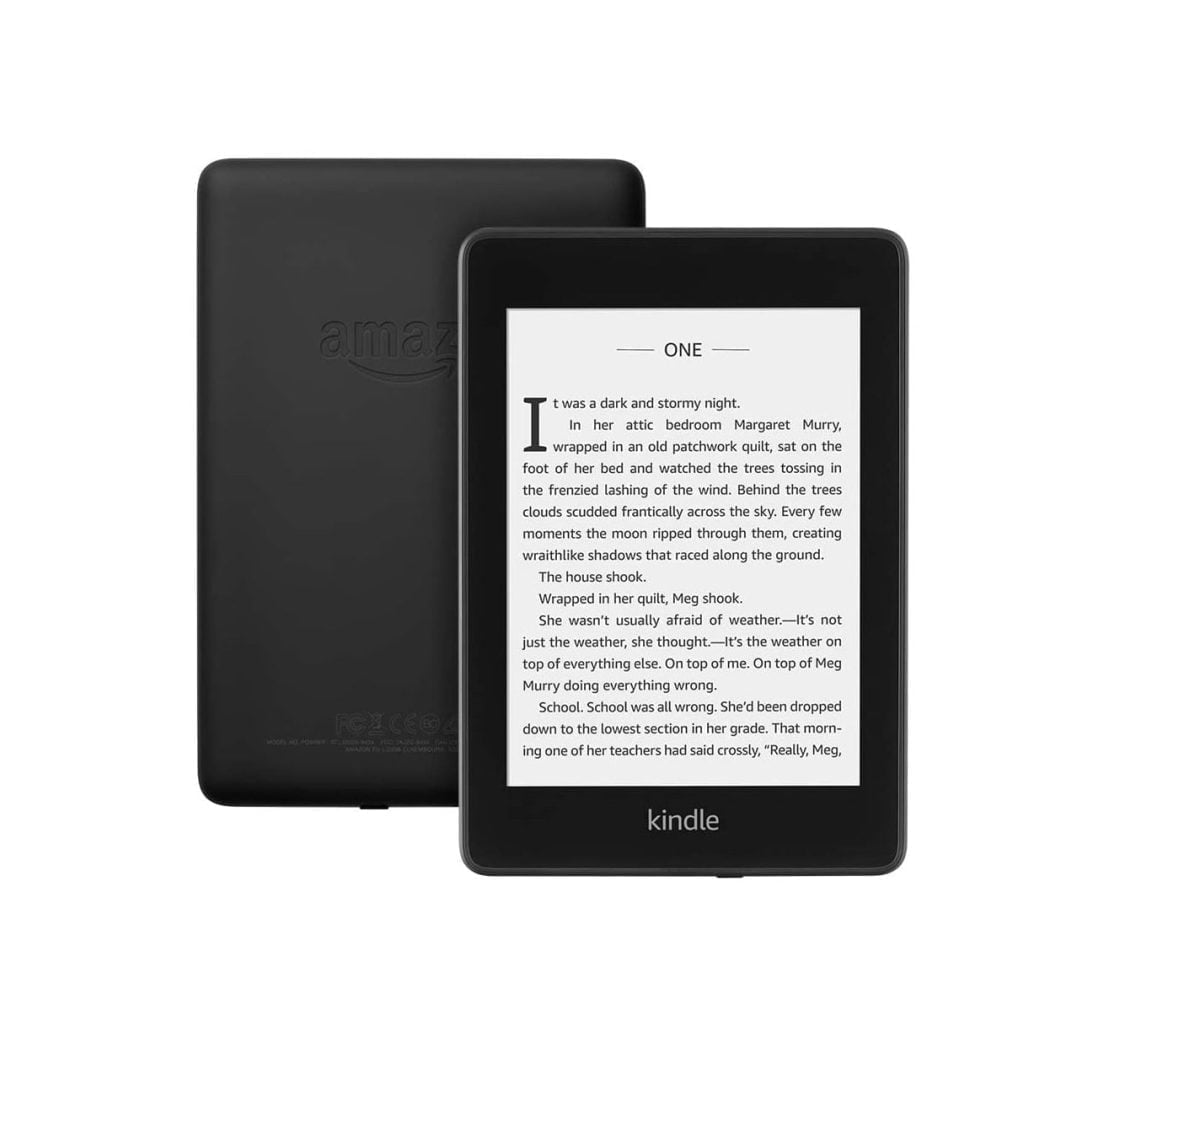 61Eaq6Gg Xl. Ac Sl1000 Amazon &Amp;Lt;H1&Amp;Gt;Kindle Paperwhite (10Th Gen) - 6&Amp;Quot; High Resolution Display With Built-In Light, 8 Gb, Waterproof, Wi-Fi&Amp;Lt;/H1&Amp;Gt; &Amp;Lt;Ul Class=&Amp;Quot;A-Unordered-List A-Vertical A-Spacing-Mini&Amp;Quot;&Amp;Gt; &Amp;Lt;Li&Amp;Gt;&Amp;Lt;Span Class=&Amp;Quot;A-List-Item&Amp;Quot;&Amp;Gt;The Thinnest, Lightest Kindle Paperwhite Yet—With A Flush-Front Design And 300 Ppi Glare-Free Display That Reads Like Real Paper Even In Bright Sunlight.&Amp;Lt;/Span&Amp;Gt;&Amp;Lt;/Li&Amp;Gt; &Amp;Lt;Li&Amp;Gt;&Amp;Lt;Span Class=&Amp;Quot;A-List-Item&Amp;Quot;&Amp;Gt;Now Waterproof, So You’re Free To Read And Relax At The Beach, By The Pool, Or In The Bath.&Amp;Lt;/Span&Amp;Gt;&Amp;Lt;/Li&Amp;Gt; &Amp;Lt;Li&Amp;Gt;&Amp;Lt;Span Class=&Amp;Quot;A-List-Item&Amp;Quot;&Amp;Gt;Browse Over 1 Million Ebooks In The Kindle Store On Amazon Us, Including Thousands Of Arabic Titles.&Amp;Lt;/Span&Amp;Gt;&Amp;Lt;/Li&Amp;Gt; &Amp;Lt;Li&Amp;Gt;&Amp;Lt;Span Class=&Amp;Quot;A-List-Item&Amp;Quot;&Amp;Gt;Now With Twice The Storage - 8Gb - Store Thousands Of Books So You Can Take Your Library With You.&Amp;Lt;/Span&Amp;Gt;&Amp;Lt;/Li&Amp;Gt; &Amp;Lt;Li&Amp;Gt;&Amp;Lt;Span Class=&Amp;Quot;A-List-Item&Amp;Quot;&Amp;Gt;The Built-In Adjustable Light Lets You Read Indoors And Outdoors, Day And Night.&Amp;Lt;/Span&Amp;Gt;&Amp;Lt;/Li&Amp;Gt; &Amp;Lt;Li&Amp;Gt;&Amp;Lt;Span Class=&Amp;Quot;A-List-Item&Amp;Quot;&Amp;Gt;A Single Battery Charge Lasts Weeks, Not Hours.&Amp;Lt;/Span&Amp;Gt;&Amp;Lt;/Li&Amp;Gt; &Amp;Lt;/Ul&Amp;Gt; Kindle Paperwhite Kindle Paperwhite (10Th Gen) 6&Amp;Quot; - 8 Gb